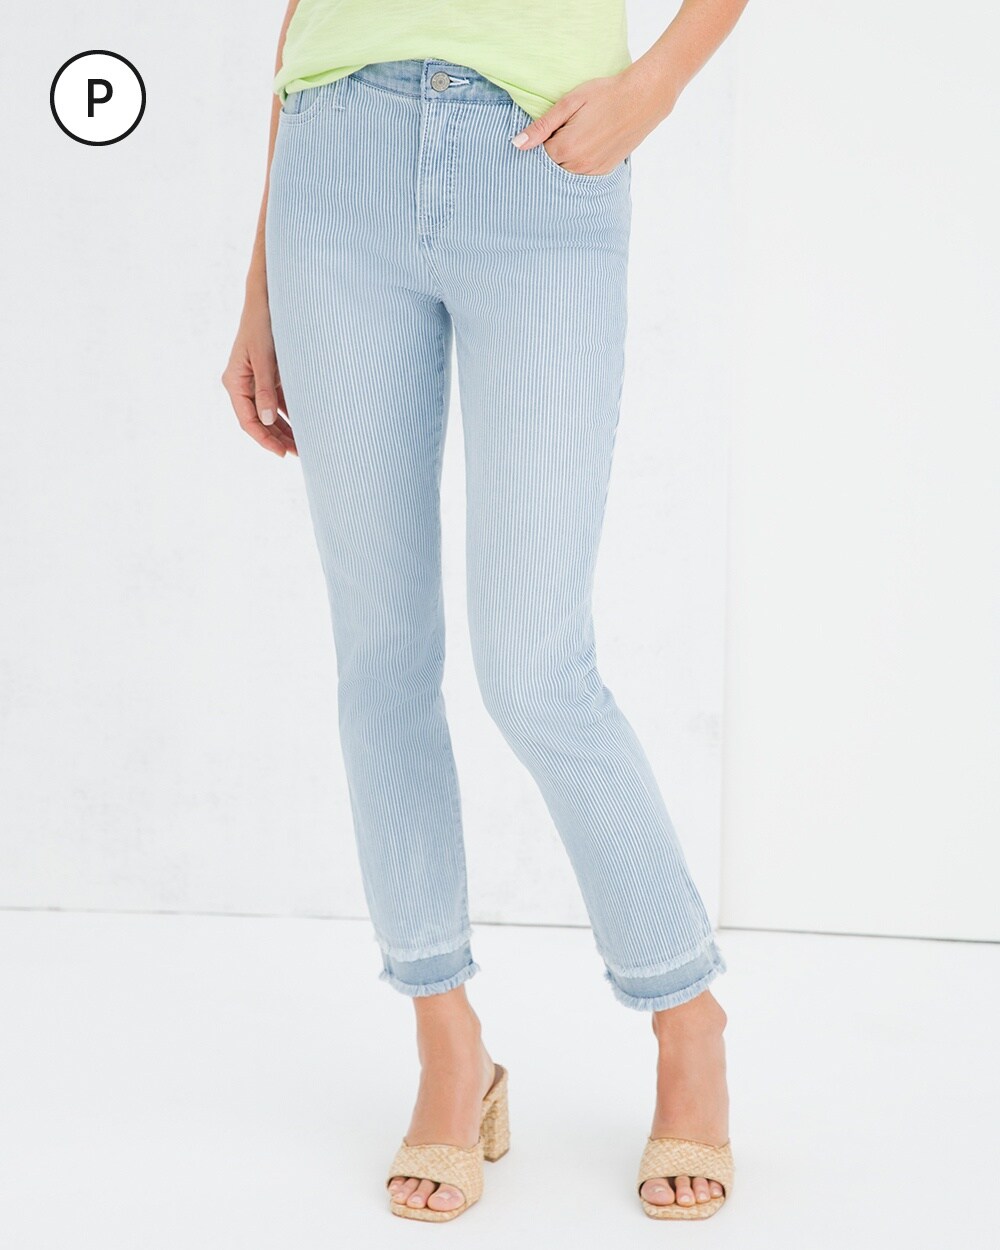 So Slimming Petite Ankle Jeans